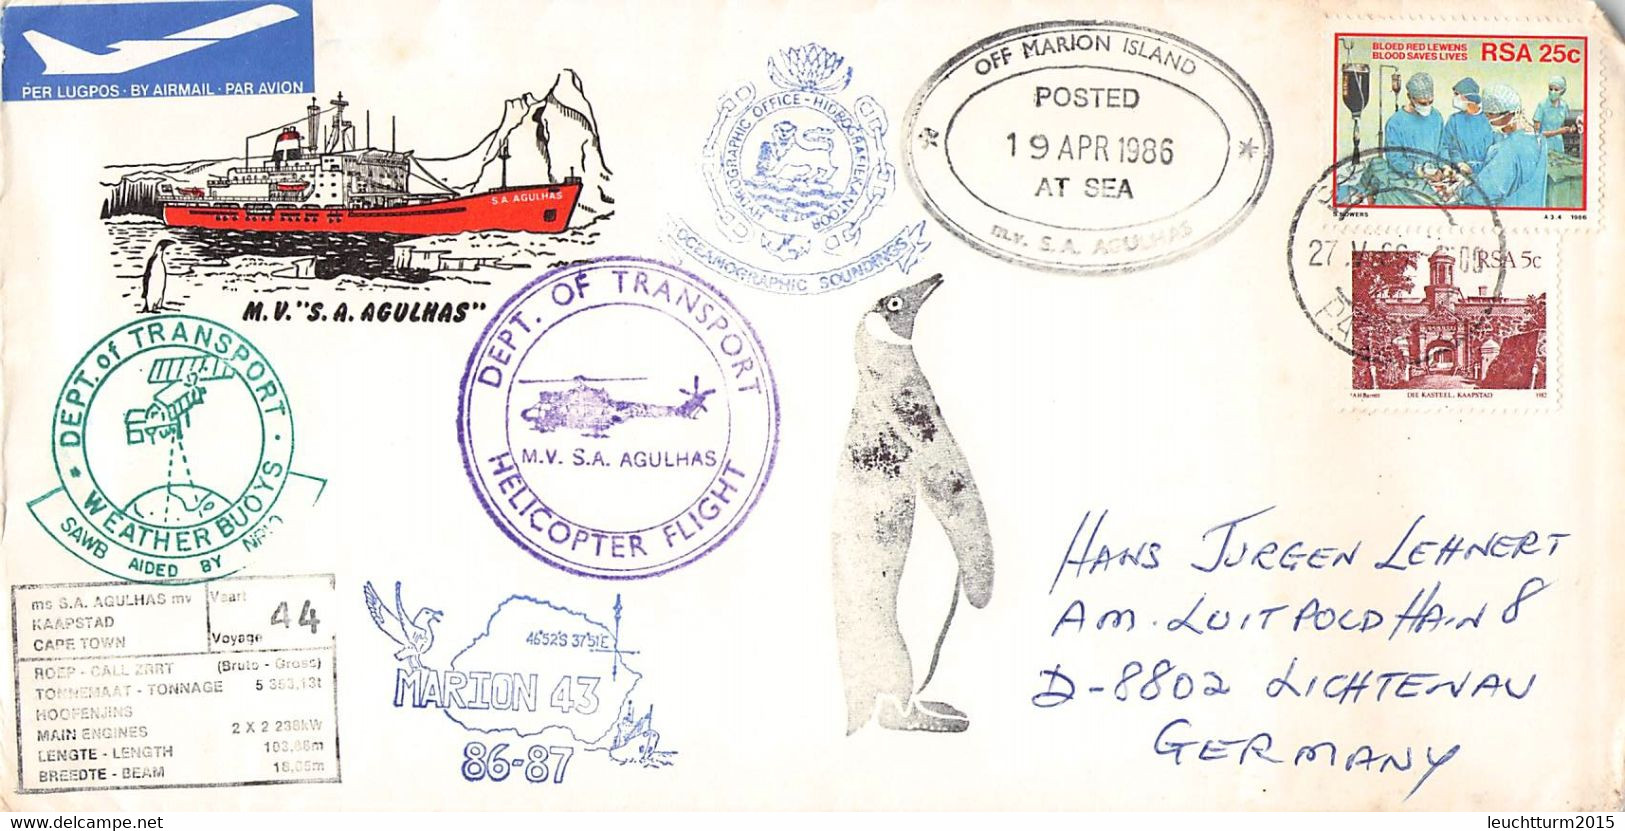 SOUTH AFRICA - POSTED AT SEA OFF MARION ISLAND 1986 / GR240 - Storia Postale